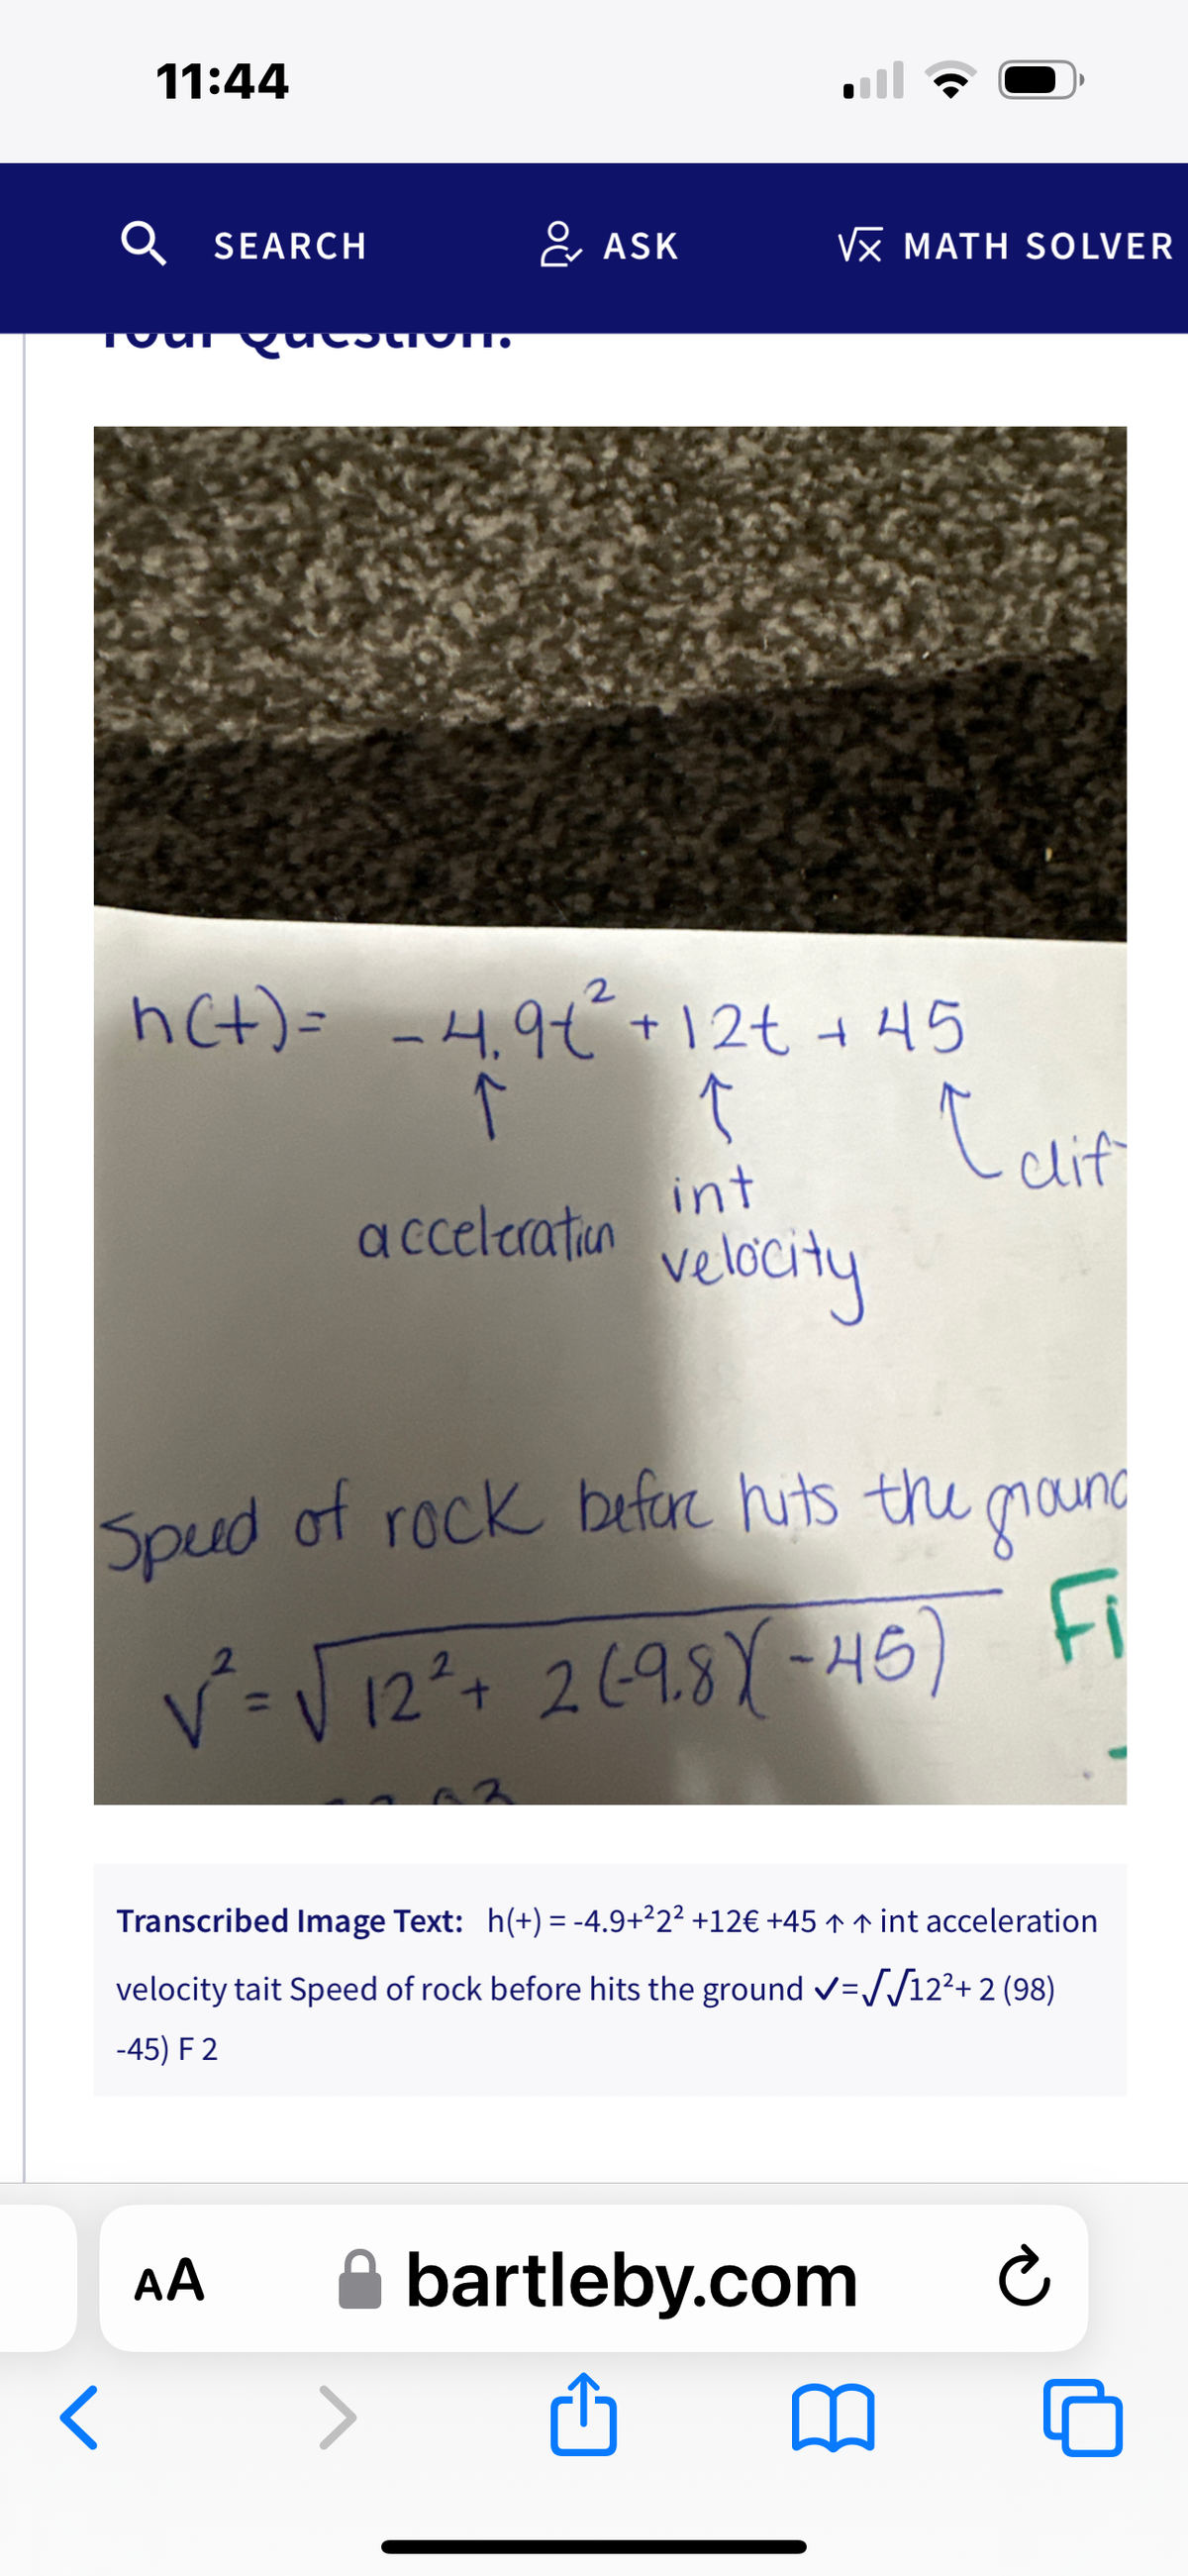 11:44
Q
<
SEARCH
& ASK
√x MATH SOLVER
nc+) = -4.9+²2² +12+ + 45
↑
↑
int
acceleration
velocity
AA
Speed of rock before hits the ground
√²=√12²+ 269.81-45) Fi
Transcribed Image Text: h(+) = -4.9+²2² +12€ +45 ↑ ↑ int acceleration
velocity tait Speed of rock before hits the ground ✓=√√√12²+2 (98)
-45) F 2
Calif
bartleby.com
Ć